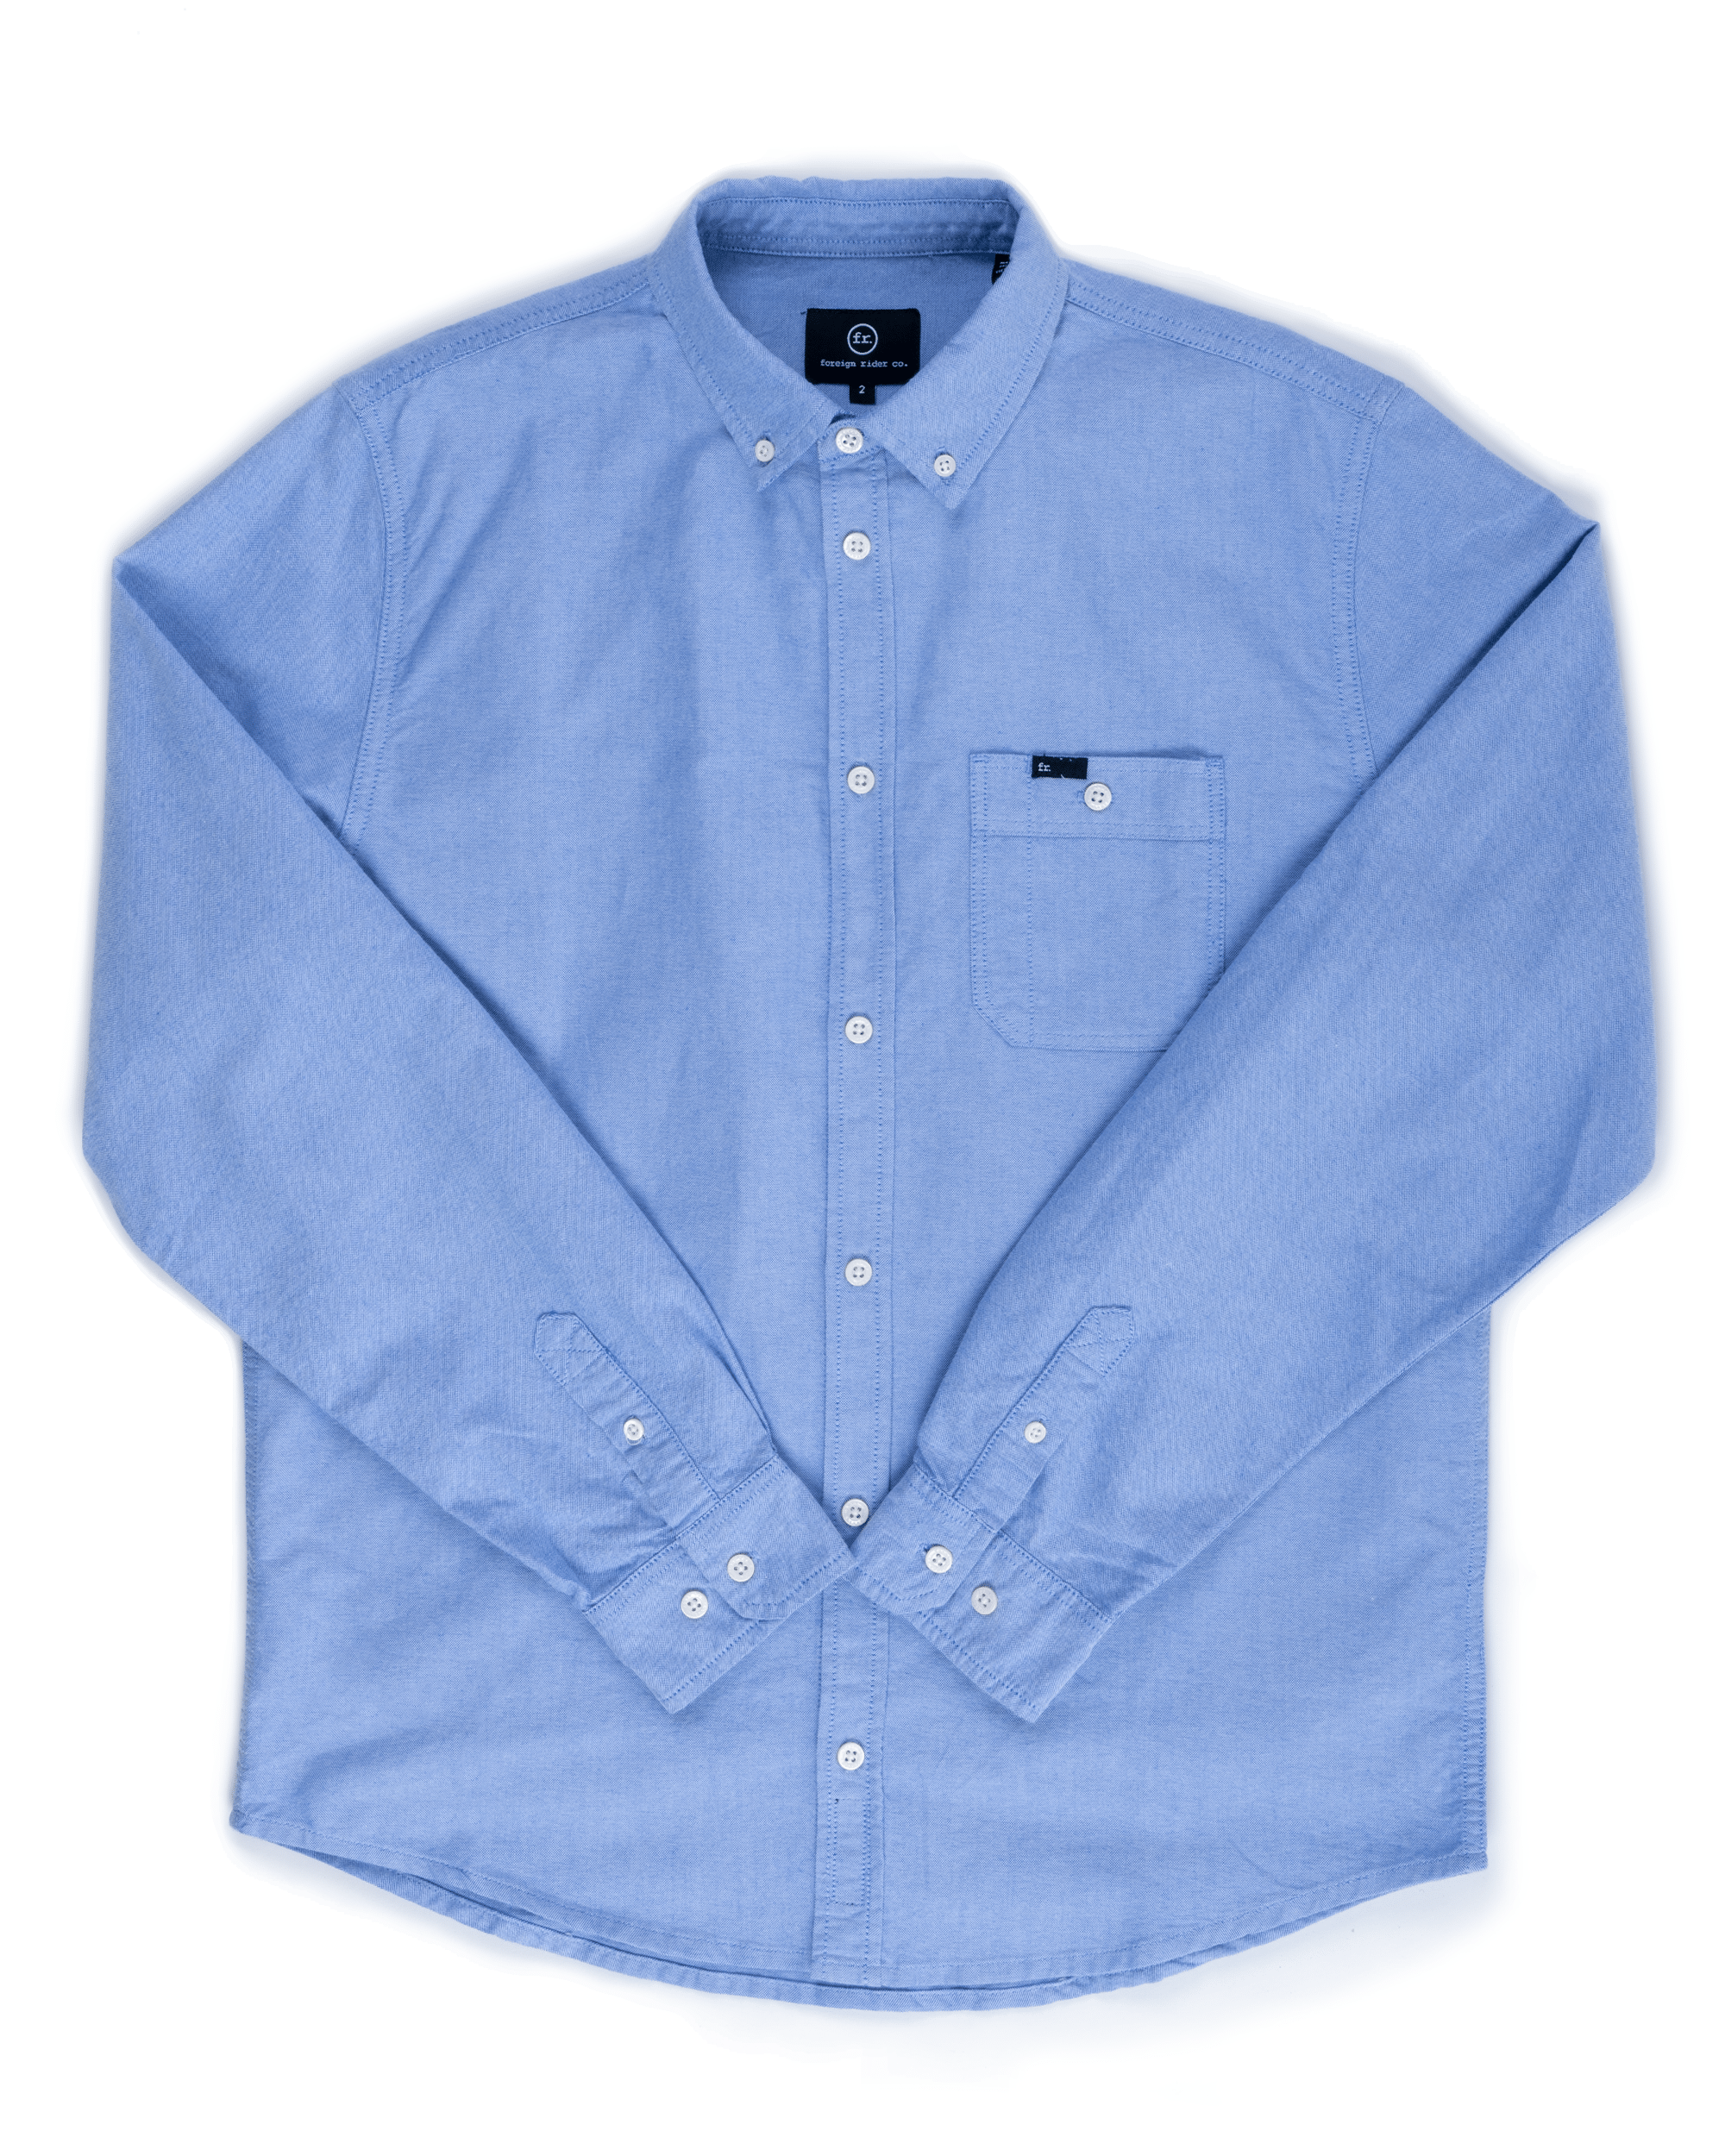 FR. Utility Button Down Oxford Blue - Foreign Rider Co.